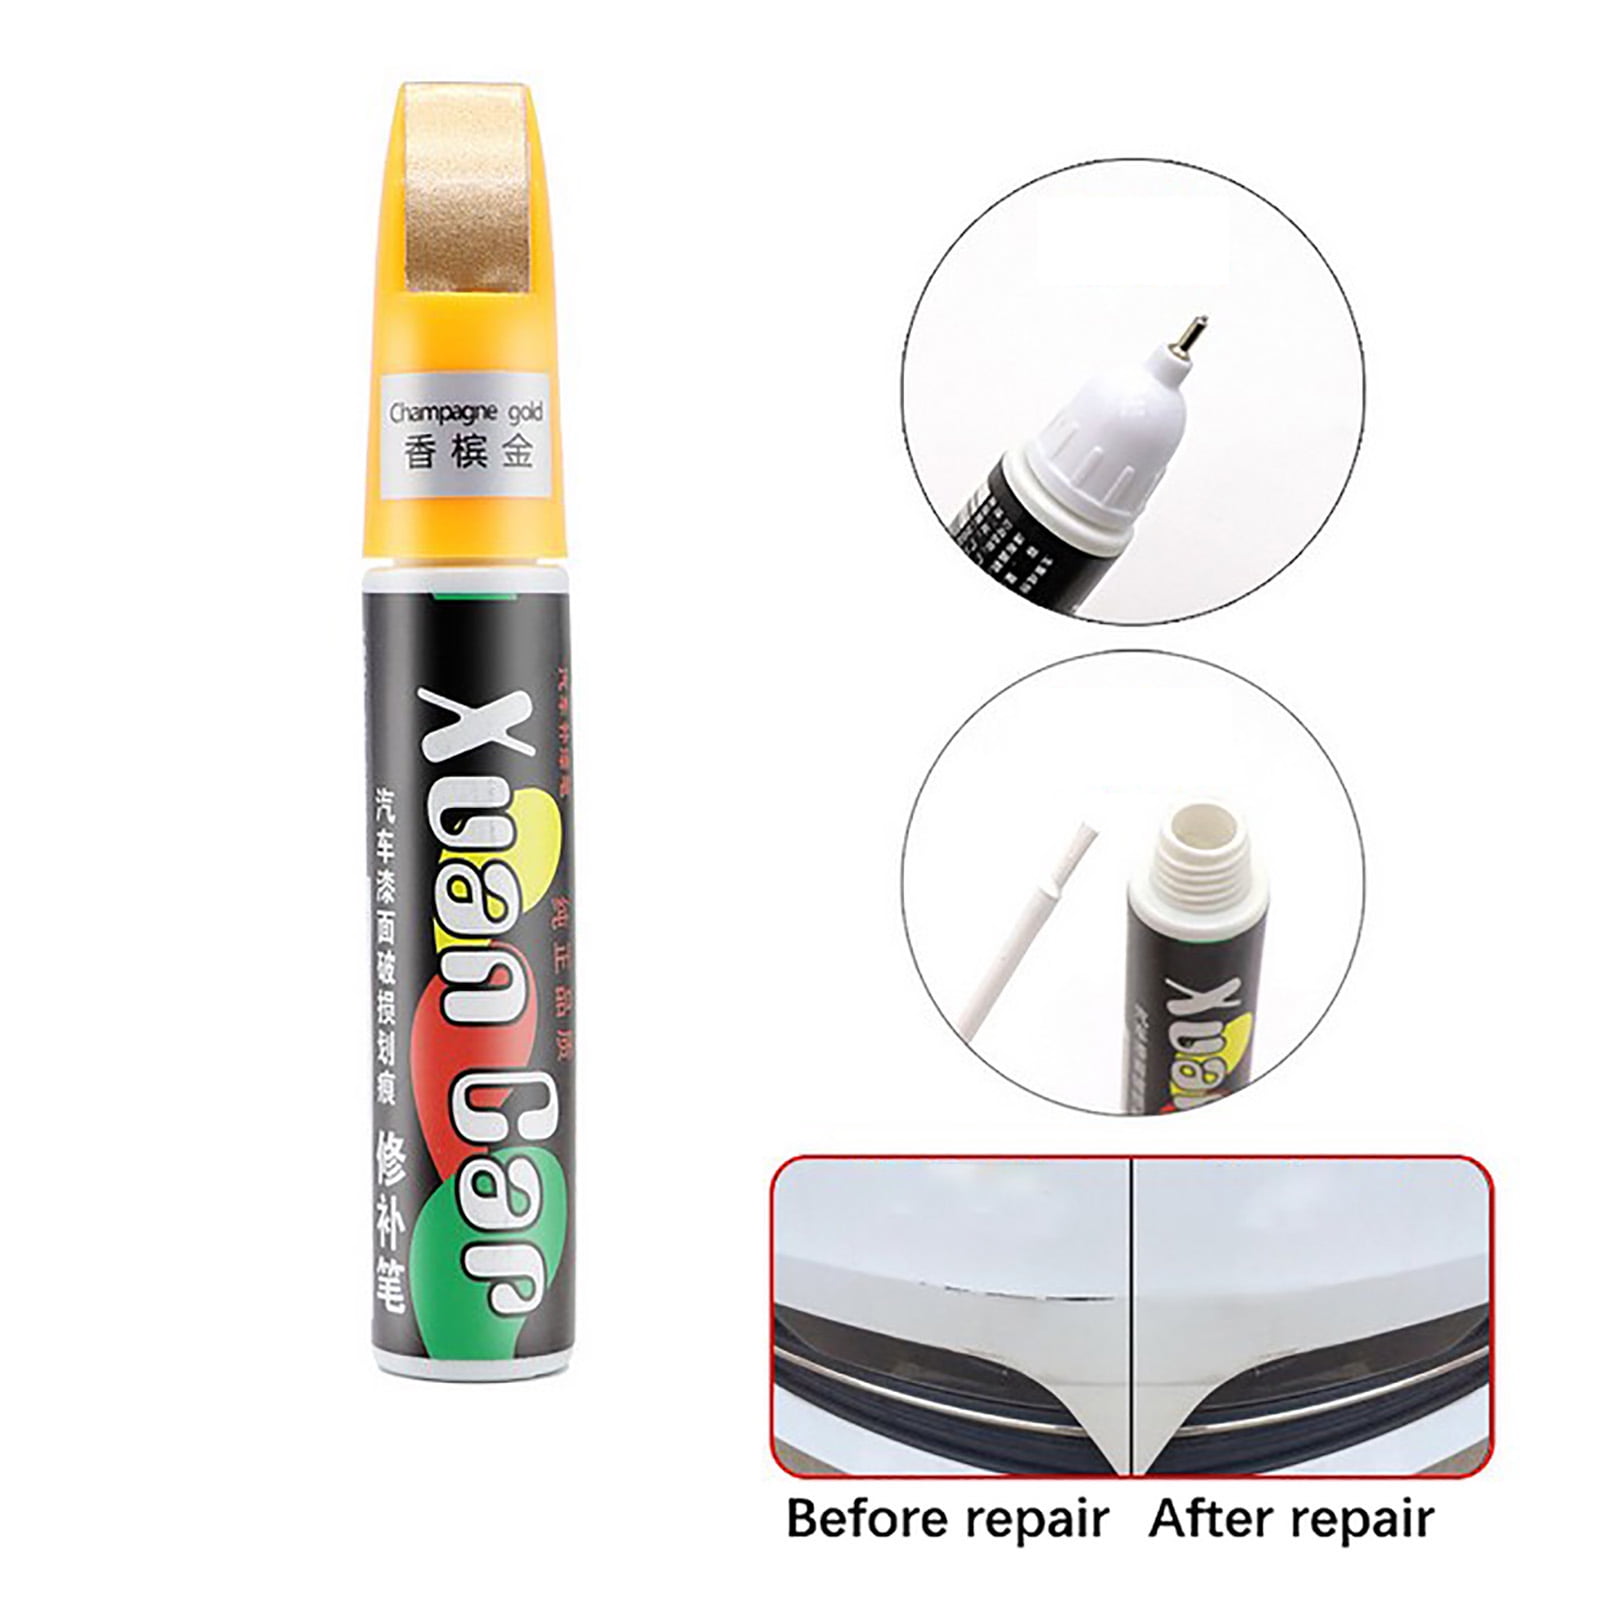 Black Touch Up Paint for Cars Scratch Repair, Quick and Easy Auto Car Paint  Scratch Remover, Two-In-One Automotive Erase Car Touch Up Paint Pen for